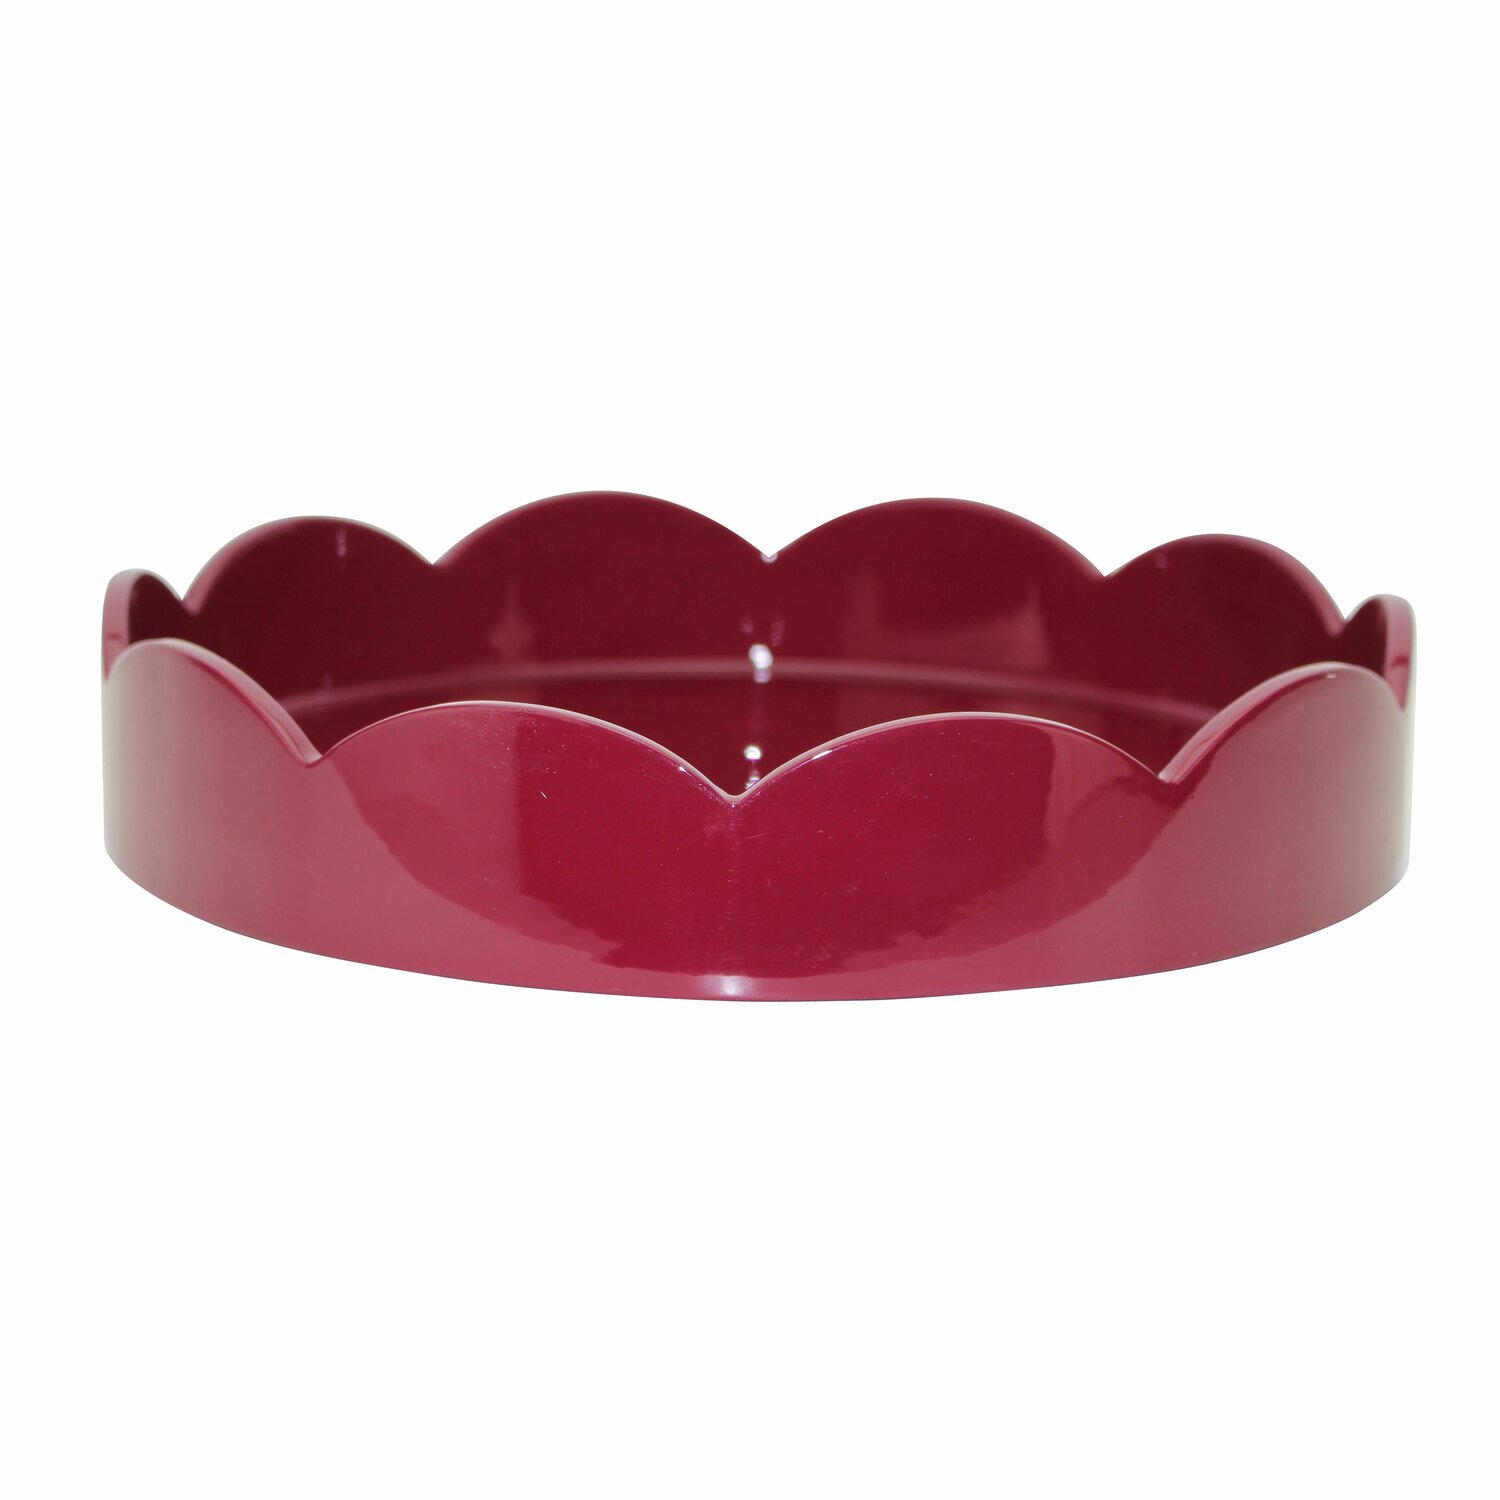 Addison Ross 8.5 x 8.5 Inch Scallop Tray Cherry Wood TR6407